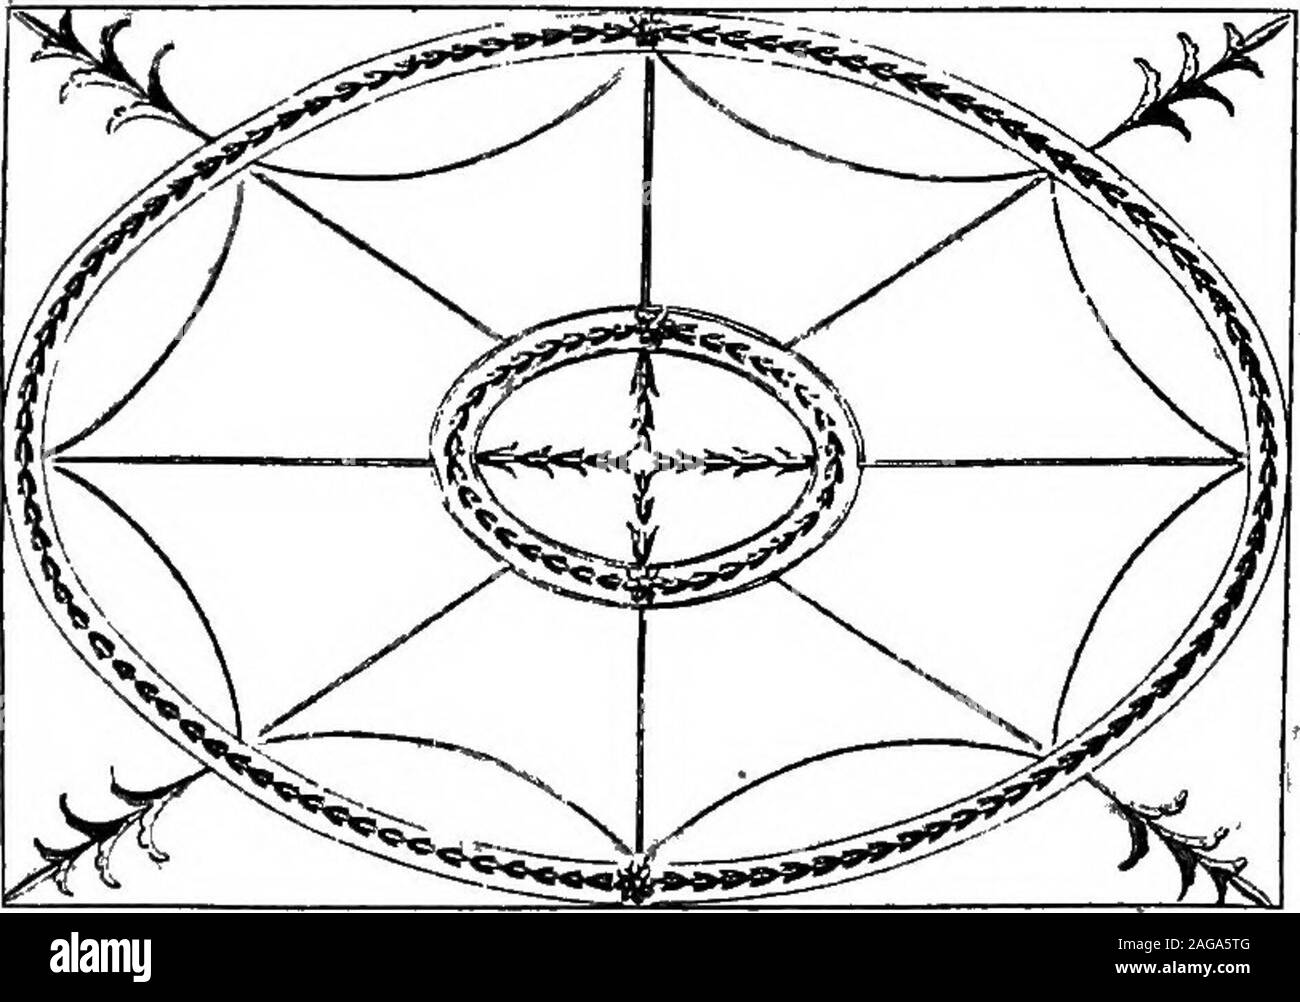 . English ironwork of the XVIIth & XVIIIth centuries; an historical & analytical account of the development of exterior smithcraft. K ^ %^ 6c FIGS. II7-I2I. FROM AX ANONYMOUS SERIES OF ENGRAVINGS, UNDATED. Plate LXXXII. li»^jBhw«jai&gt;»W».*»Wi«»gnr&lt;«rwlBH Stock Photo